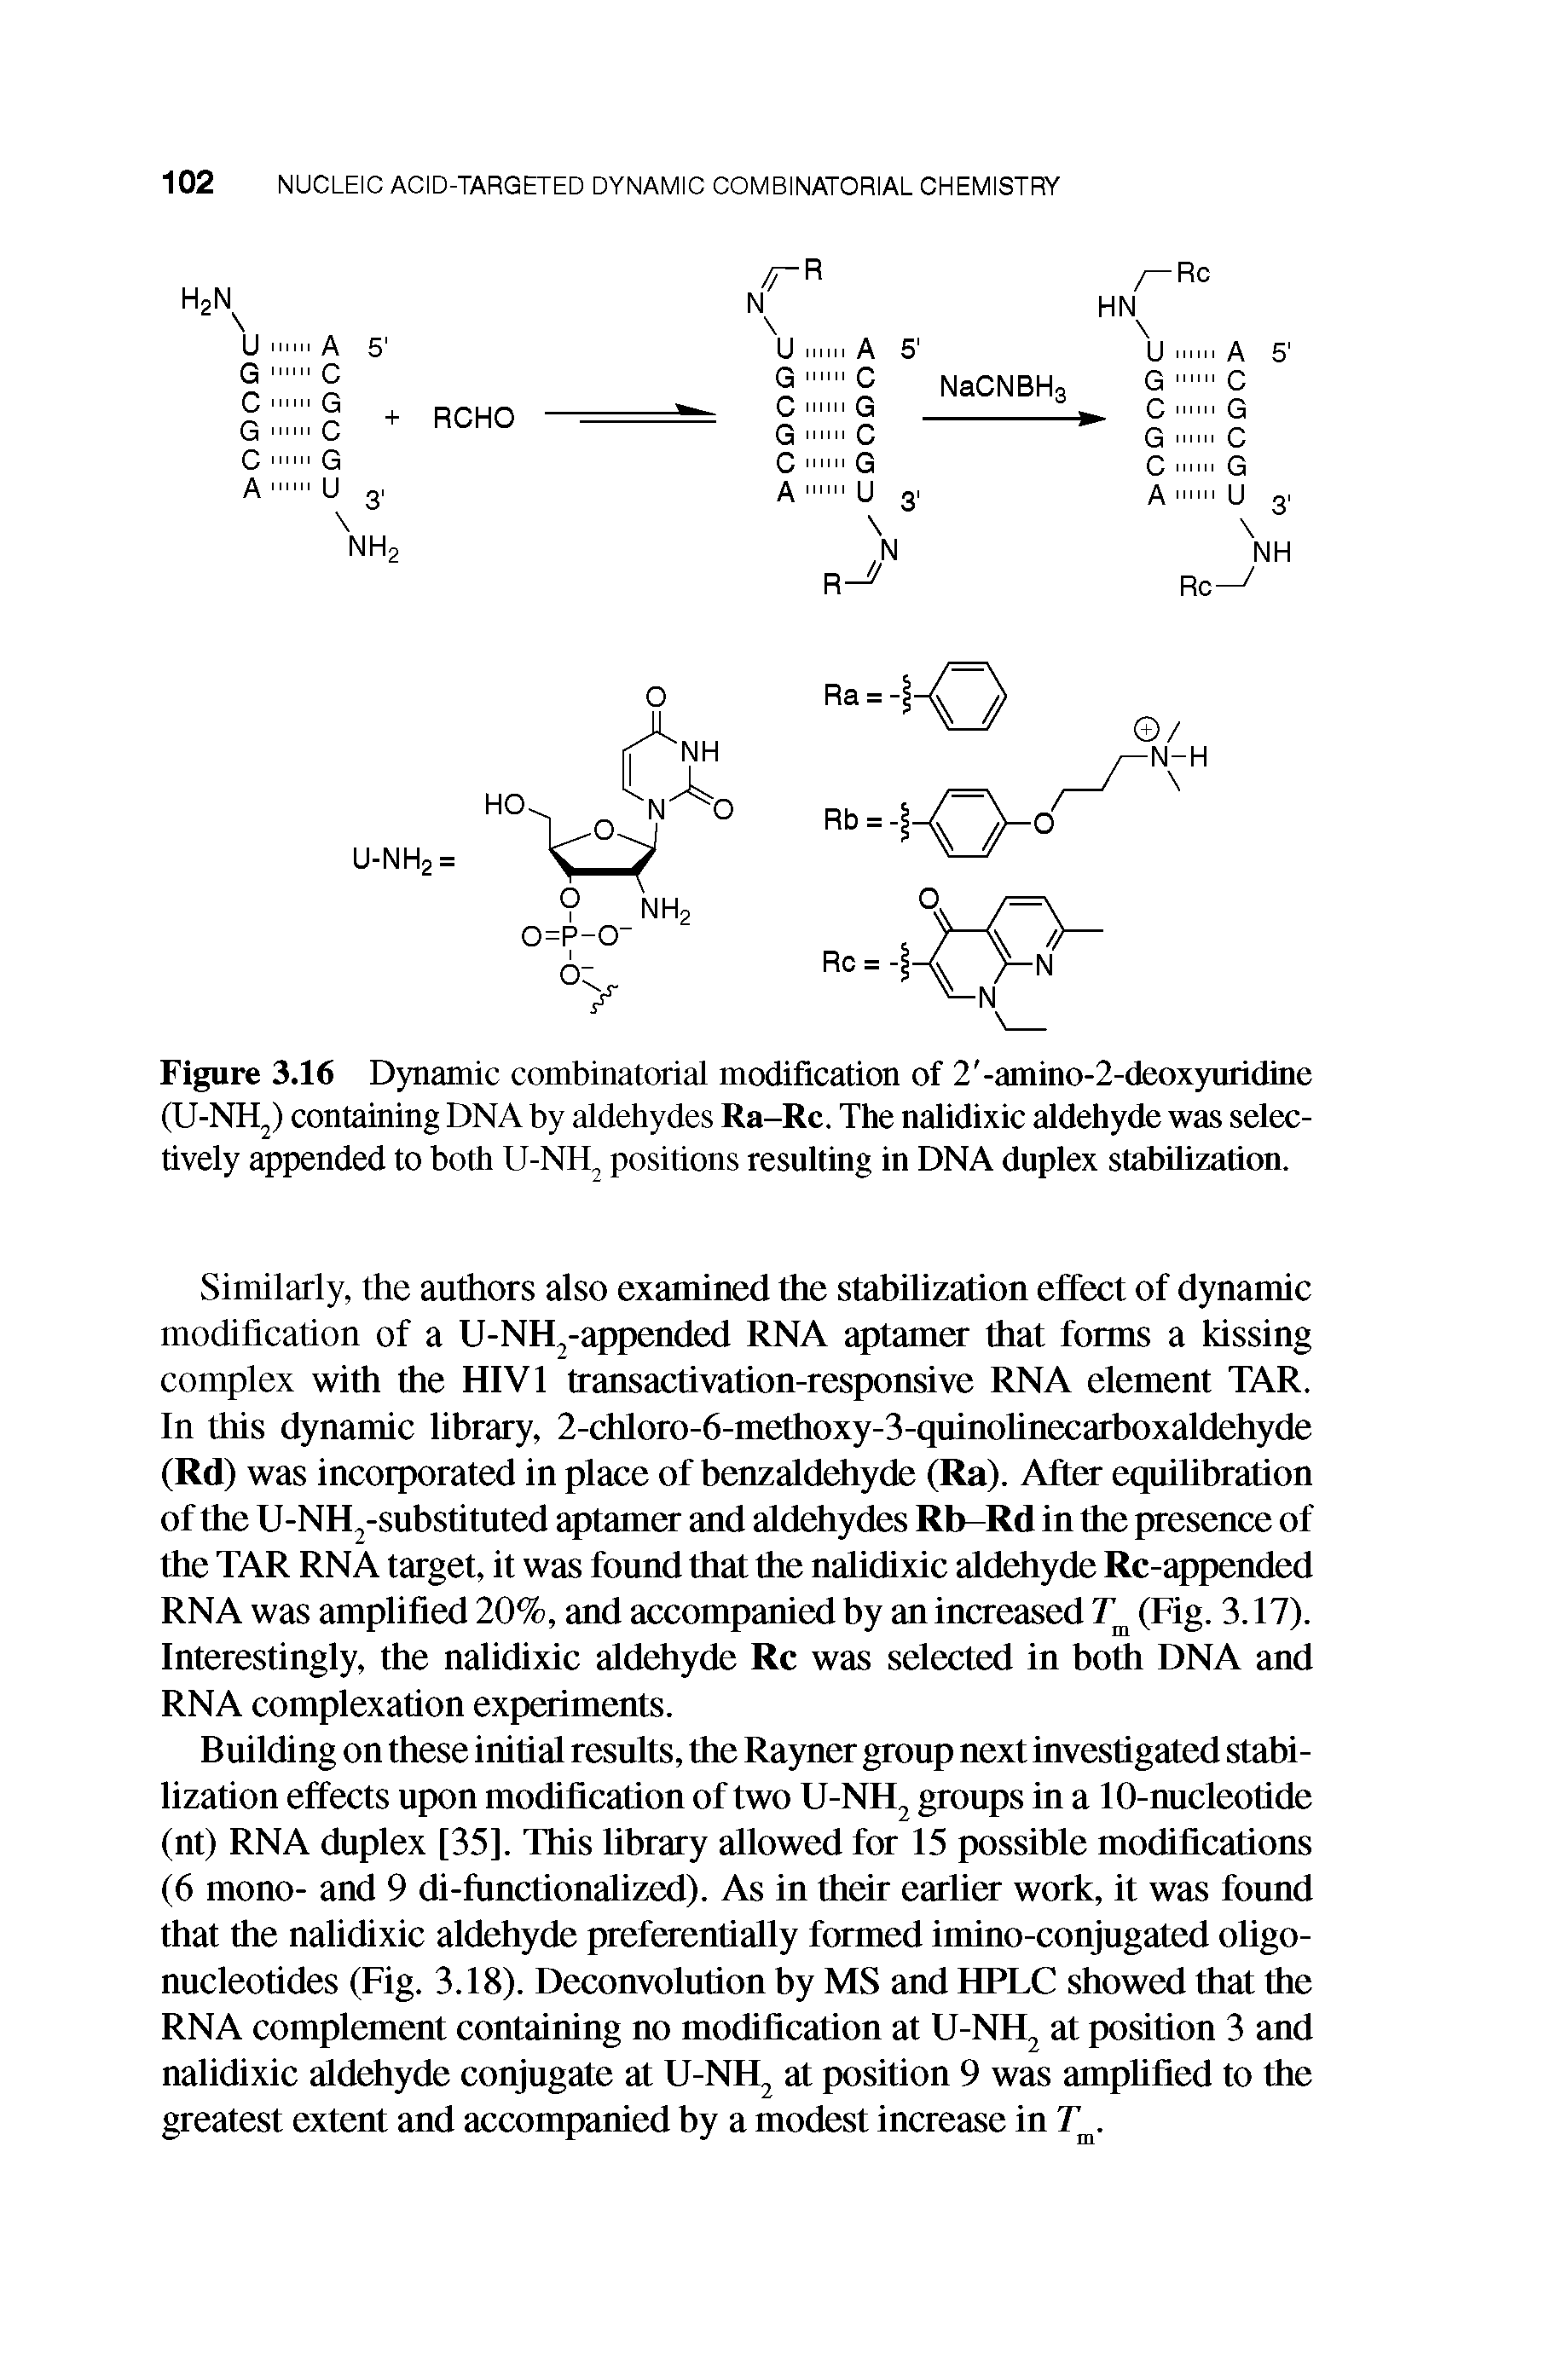 Figure 3.16 Dynamic combinatorial modification of 2 -amino-2-deoxyuridine (U-NH ) containing DNA by aldehydes Ra-Rc. The nalidixic aldehyde was selectively appended to both U-NH positions resulting in DNA duplex stabilization.